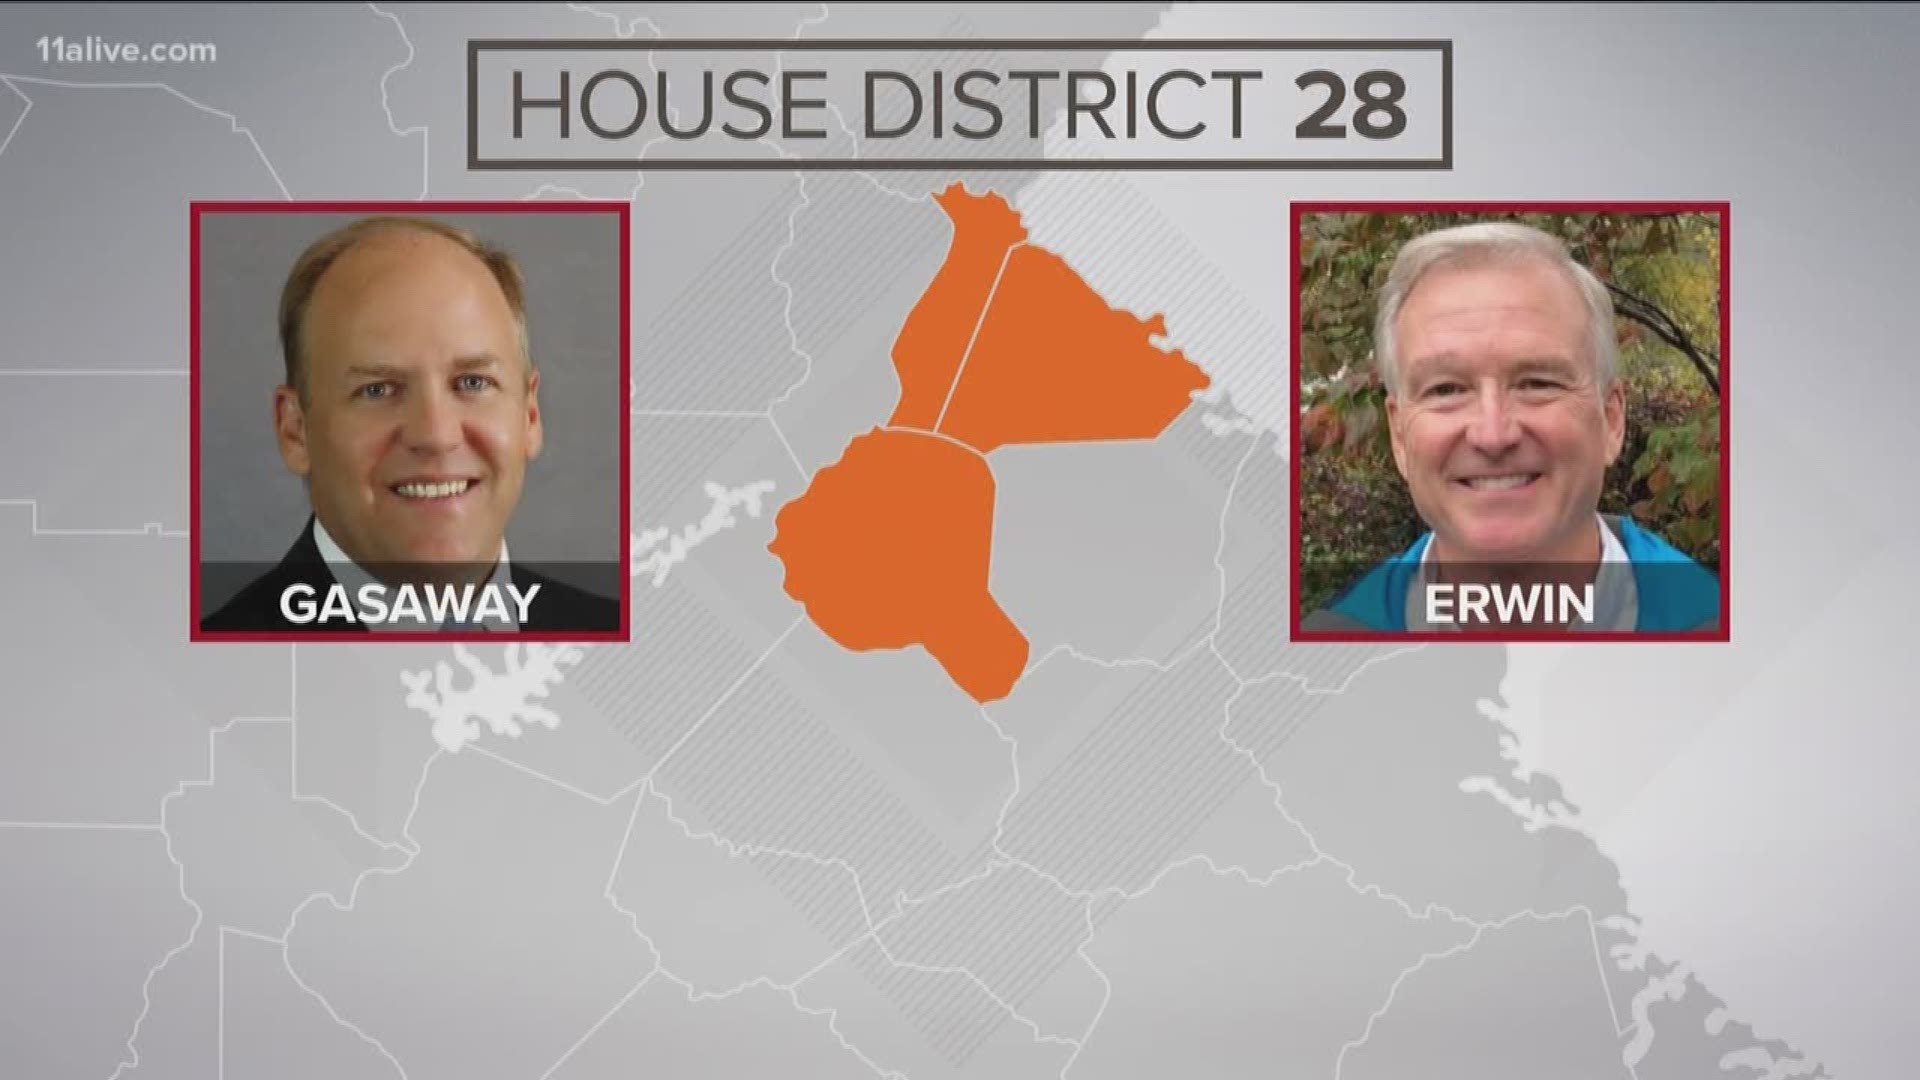 The Georgia House District 28 race between incumbent Dan Gasaway and challenger Chris Erwin, came down to a mere handful of votes.